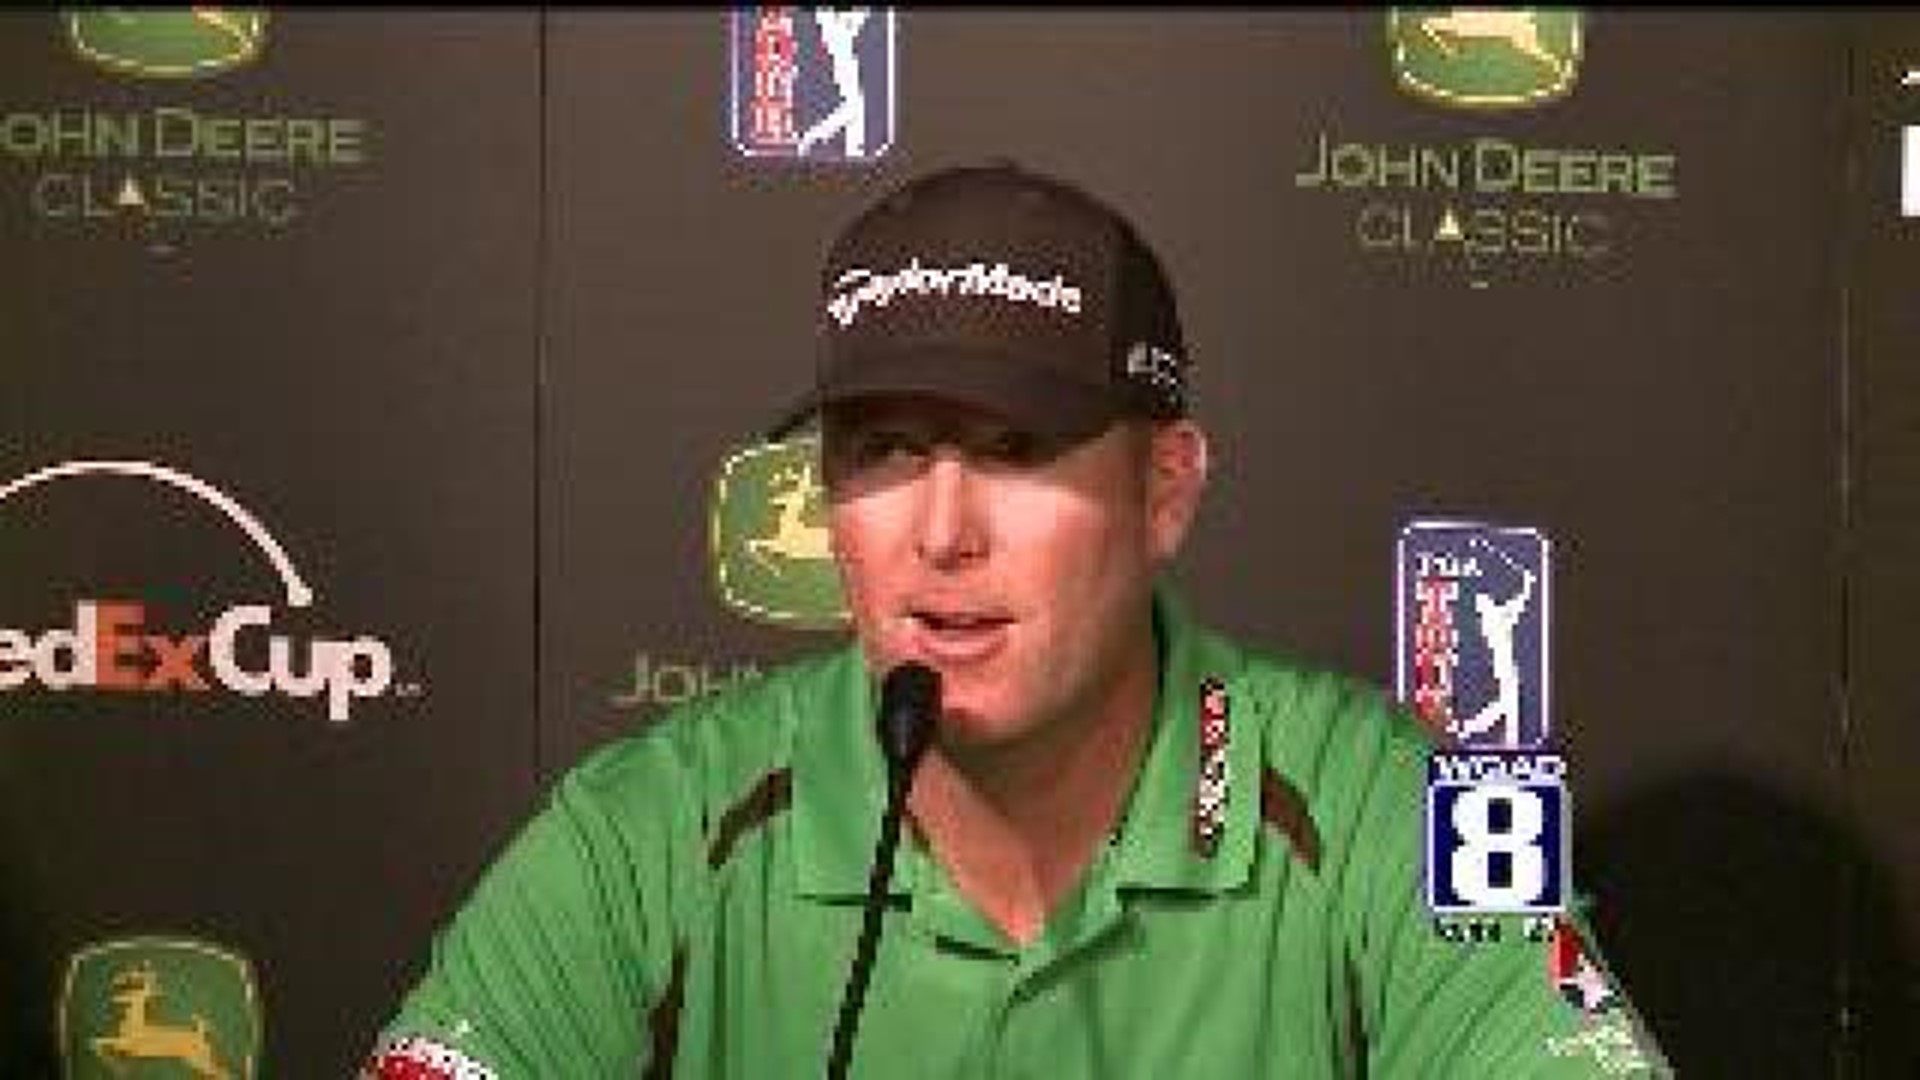 Points Sets Sights On Deere Run